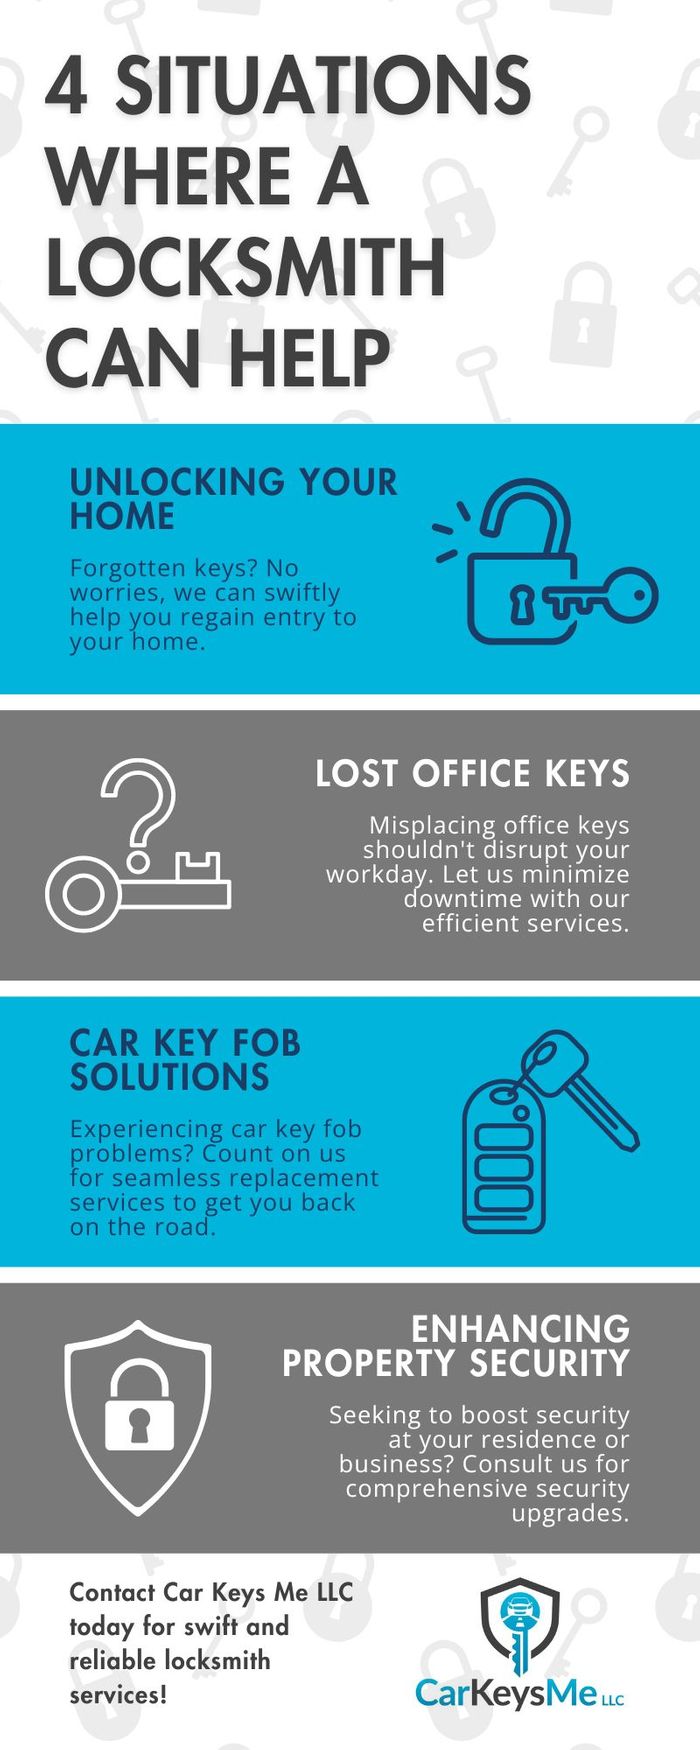 M38667 - Infographic - When Should You Call A Locksmith.jpg